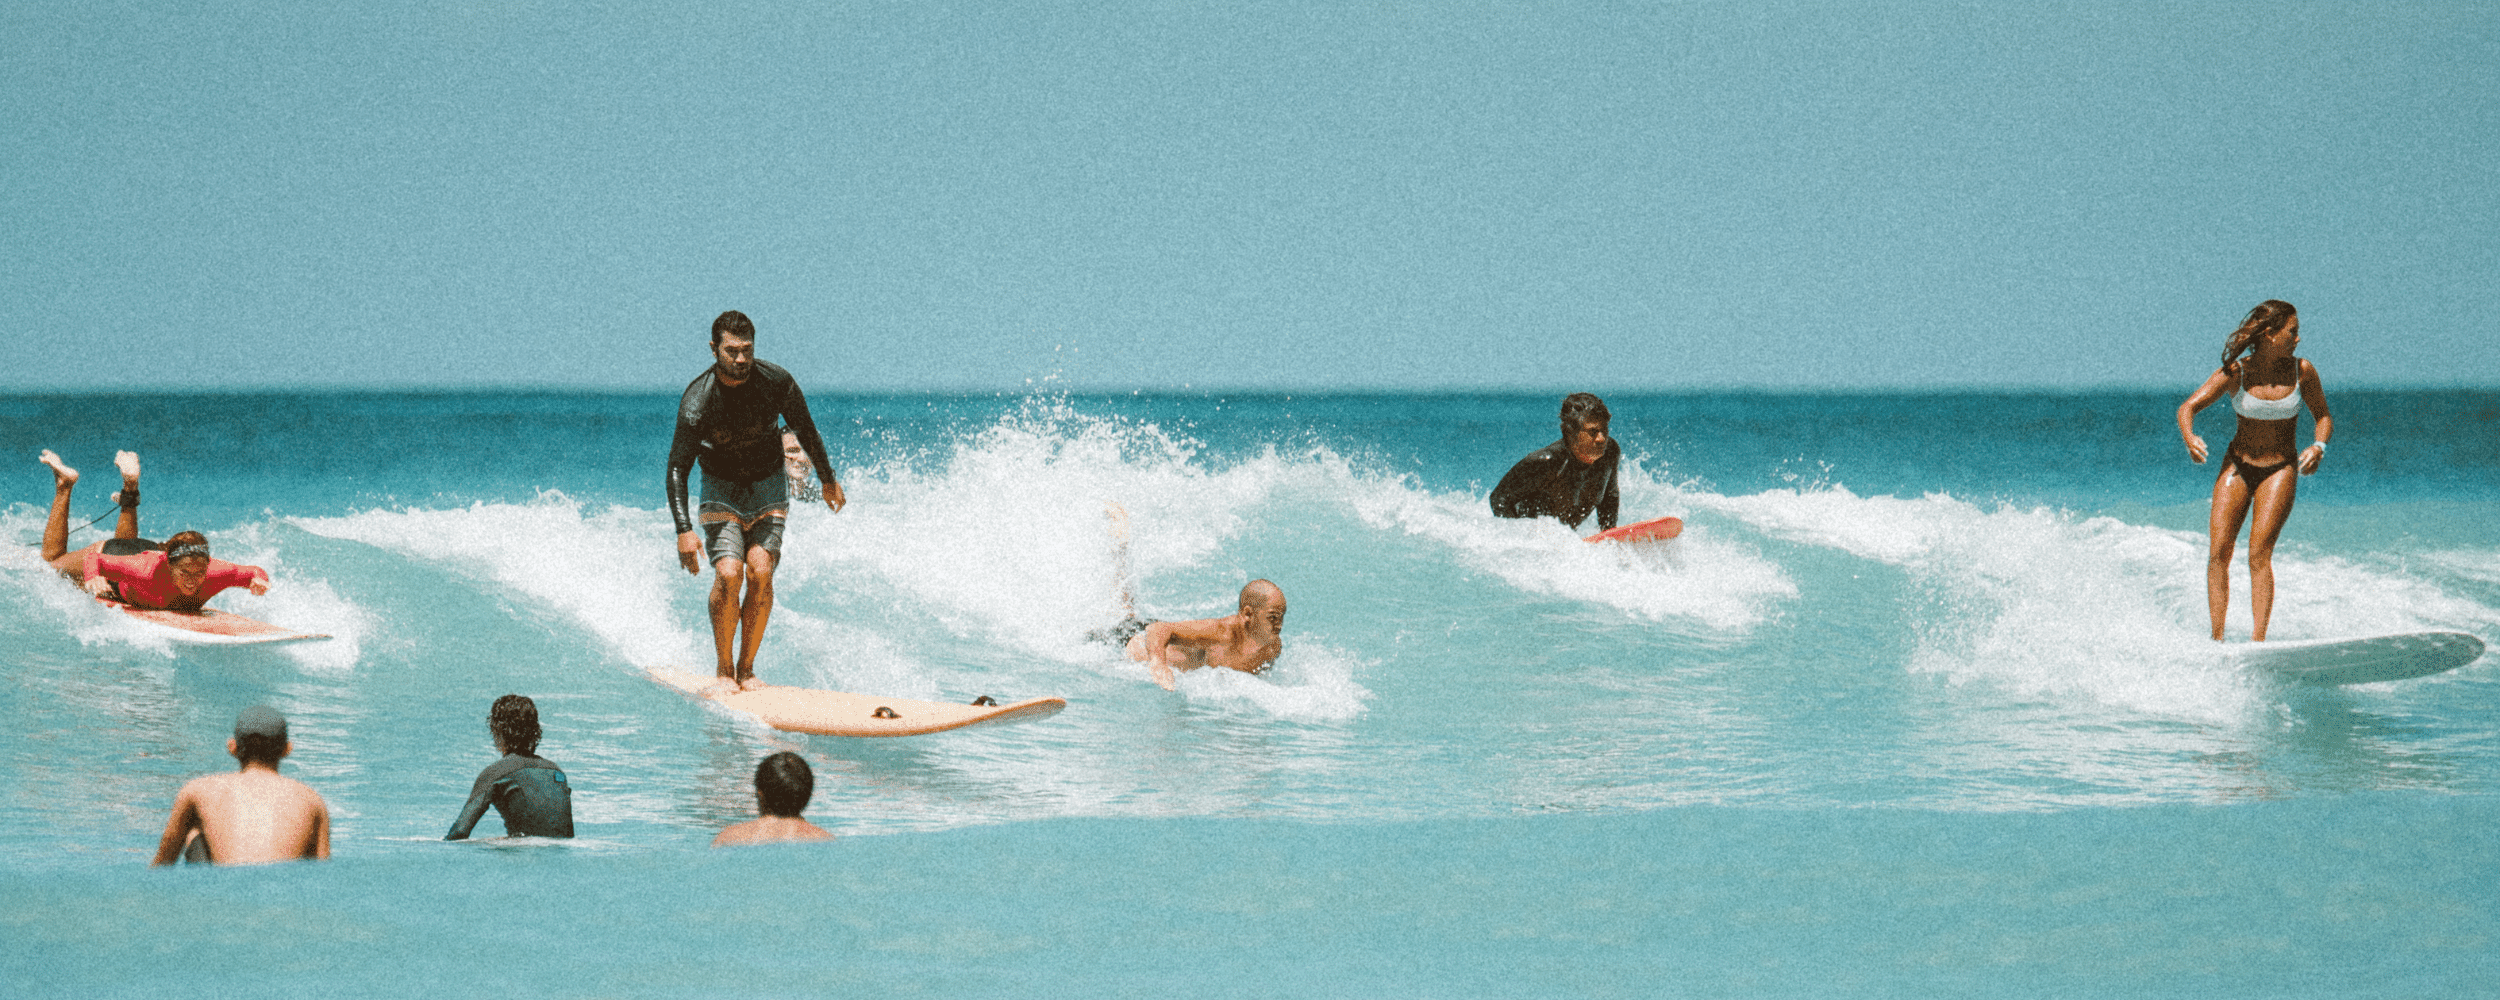 people surfing happily at the beach